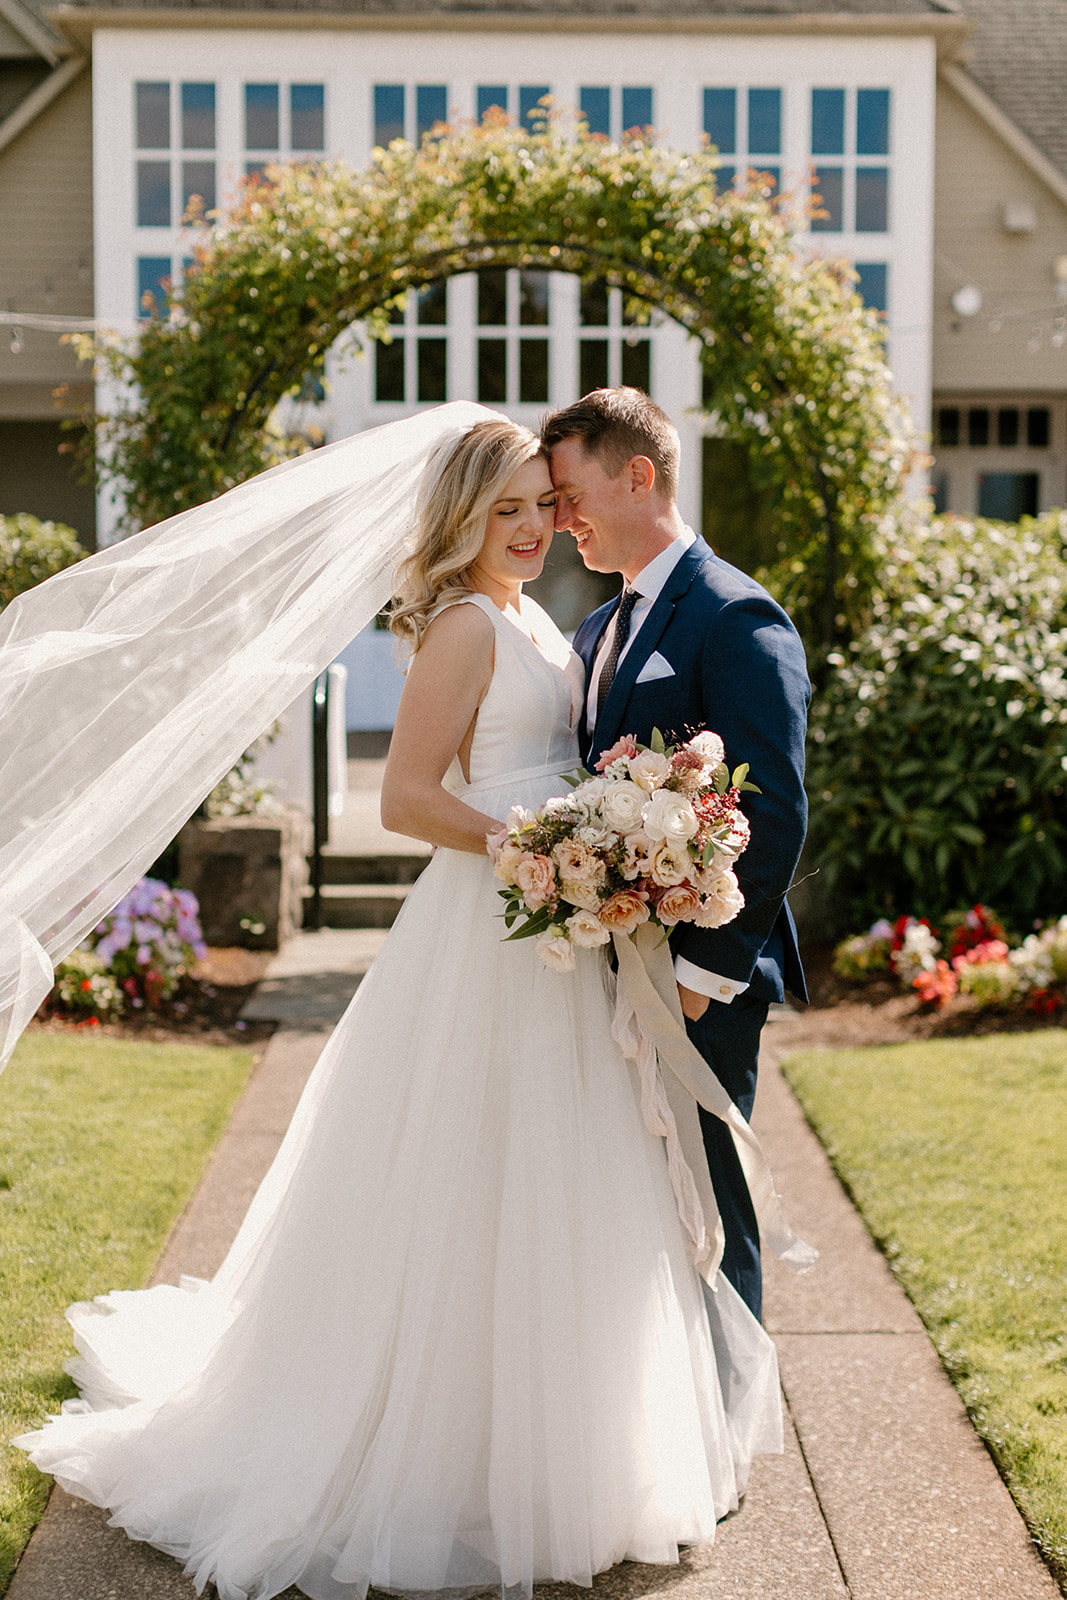 A bride and groom share a sweet moment outside at their Oregon Golf Club wedding.